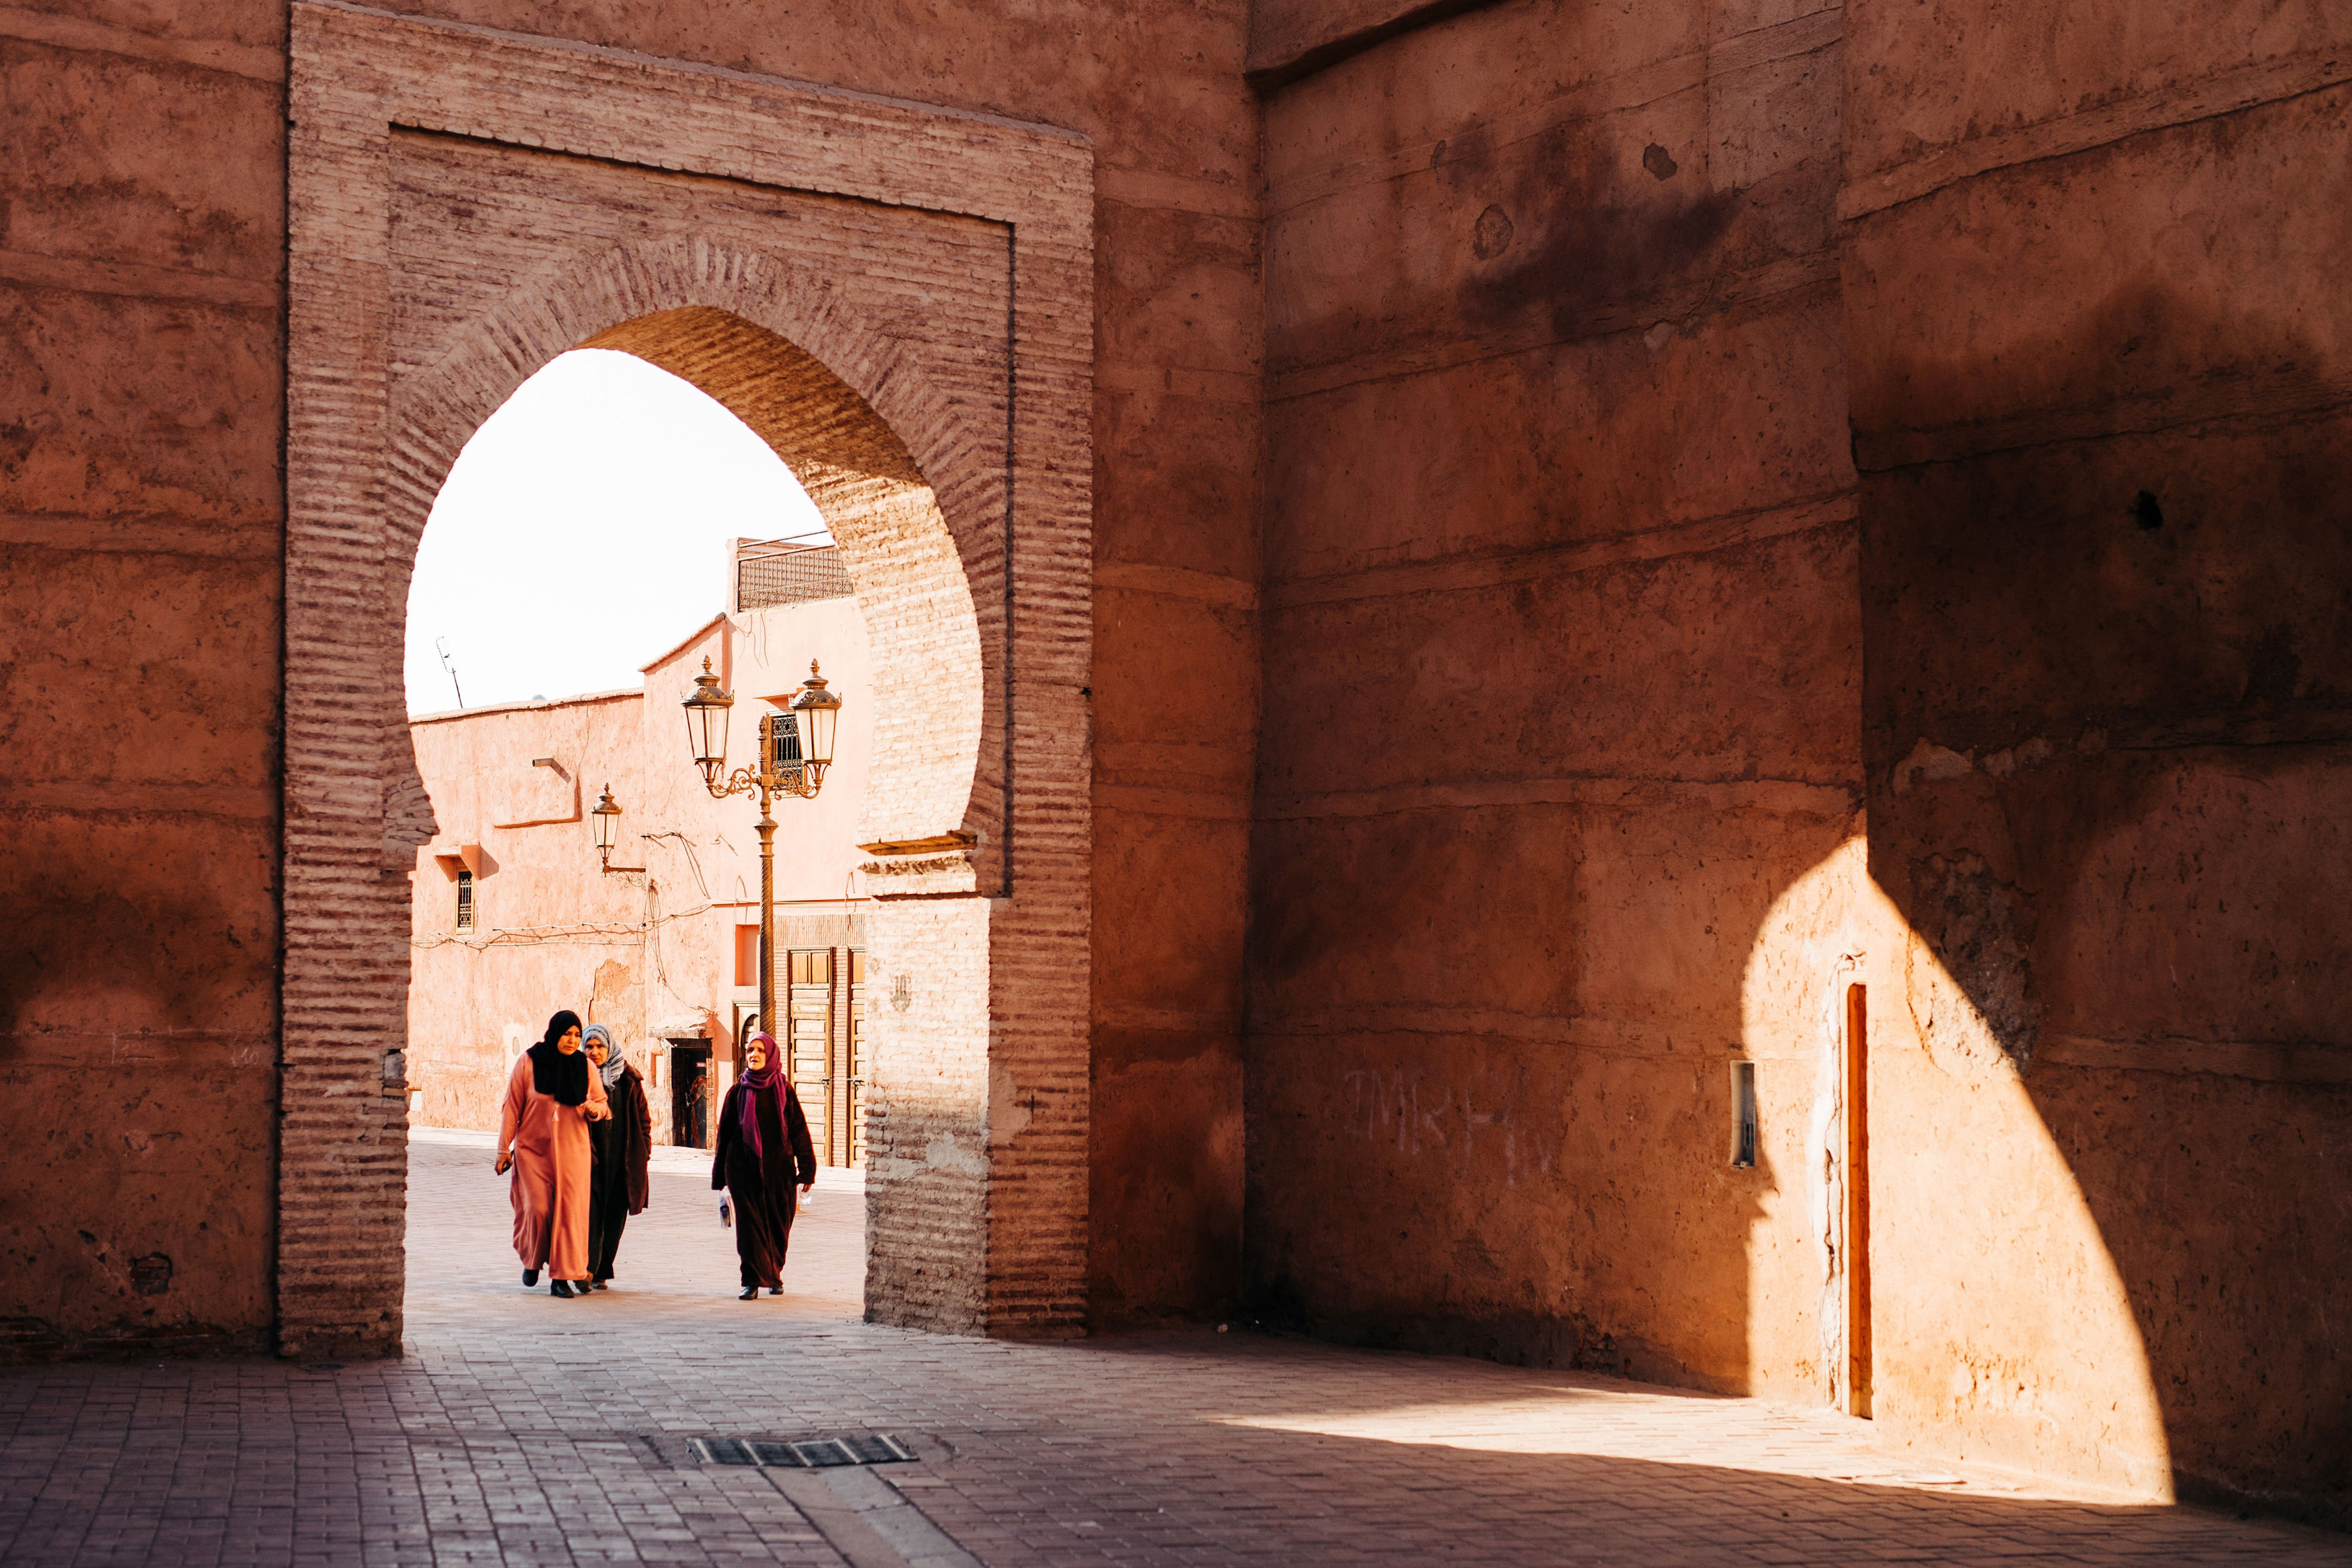 Sometimes areas are car-free out of sheer necessity, as proven by Morocco’s labyrinthine Fes el-Bali (also known as the <a href="https://www.cntraveler.com/story/where-to-eat-stay-and-play-in-old-fez-morocco?mbid=synd_msn_rss&utm_source=msn&utm_medium=syndication">Medina of Fez</a>). Cars simply won’t fit down the 9,400 narrow alleyways in this walled area, which is stuffed to the brims with shops, mosques, and leather tanneries. Most people simply get around by foot—although carts, donkeys, and bicycles are common alternatives.<p>Sign up to receive the latest news, expert tips, and inspiration on all things travel</p><a href="https://www.cntraveler.com/newsletter/the-daily?sourceCode=msnsend">Inspire Me</a>